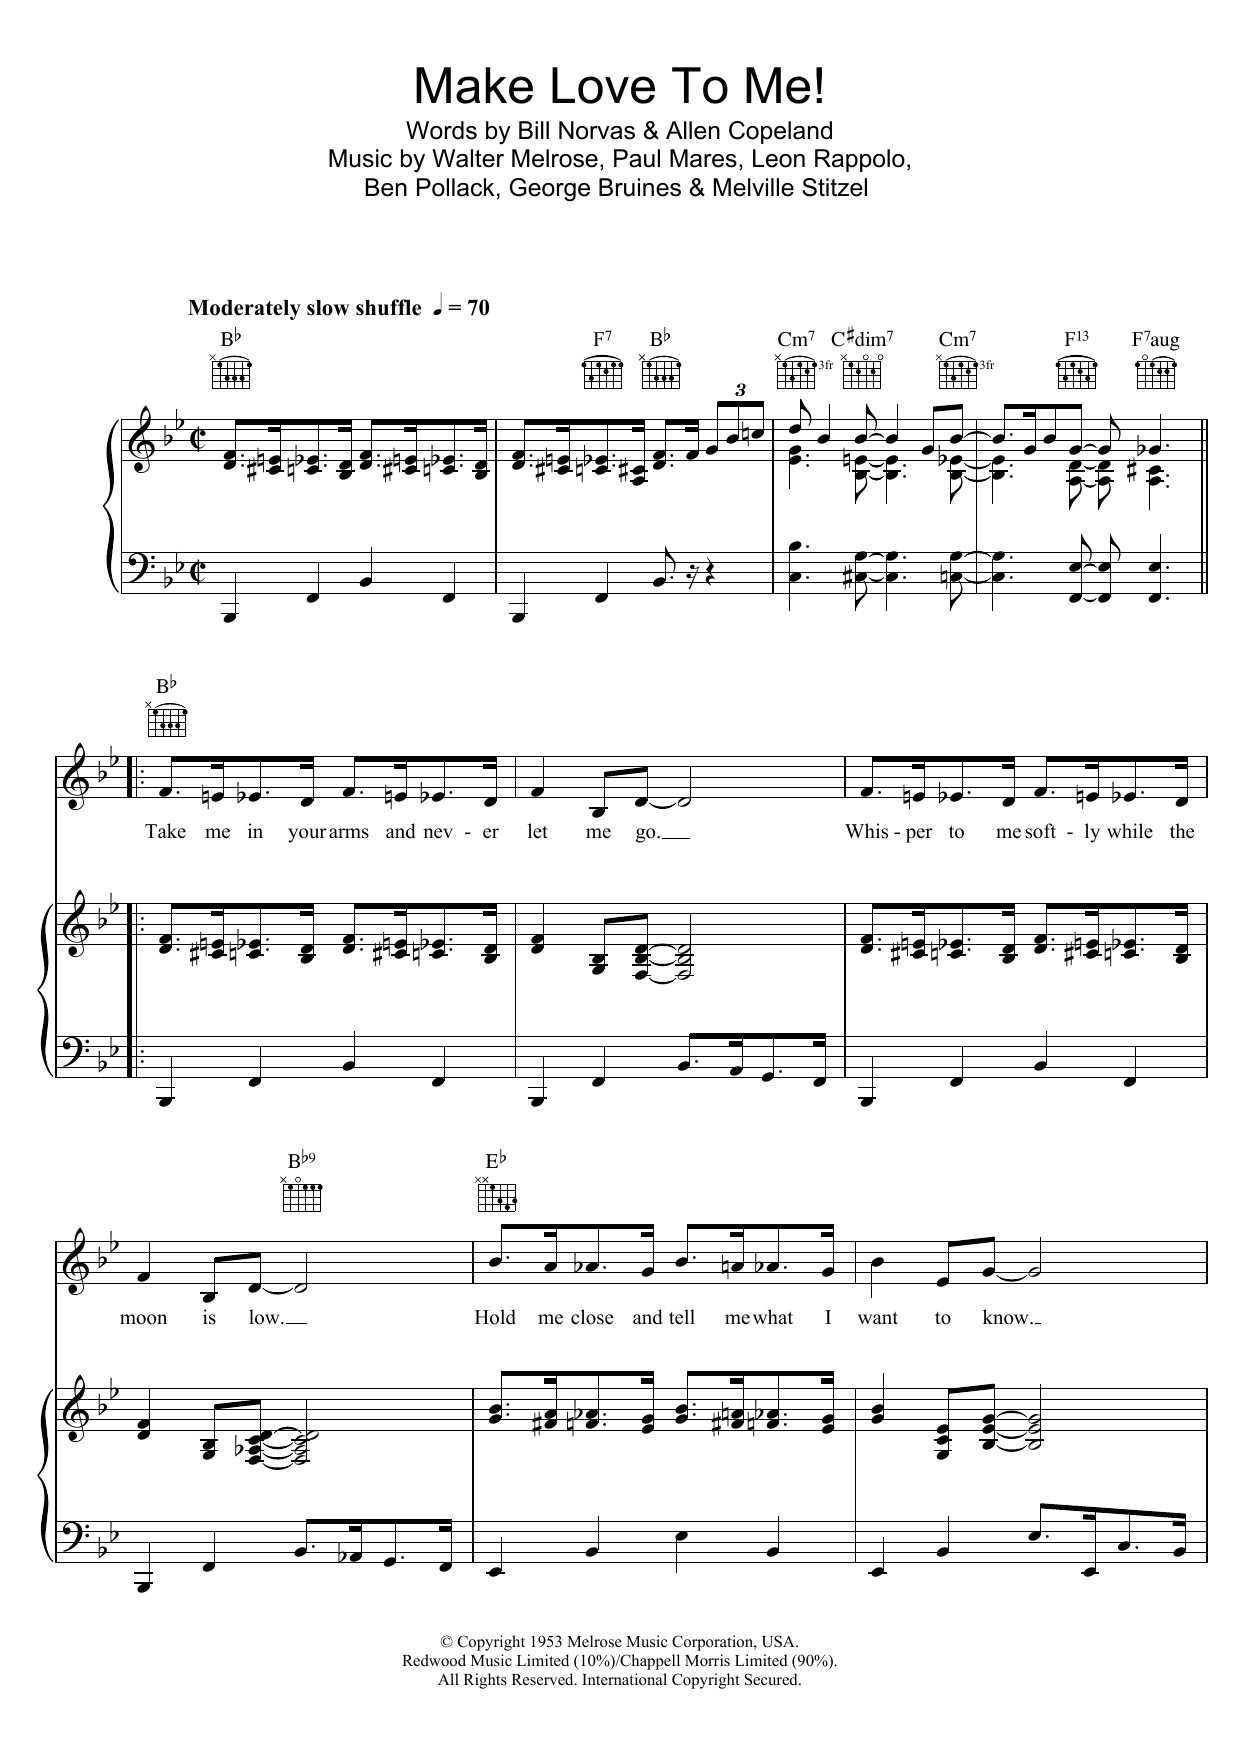 Download New Orleans Rhythm Kings Make Love To Me Sheet Music